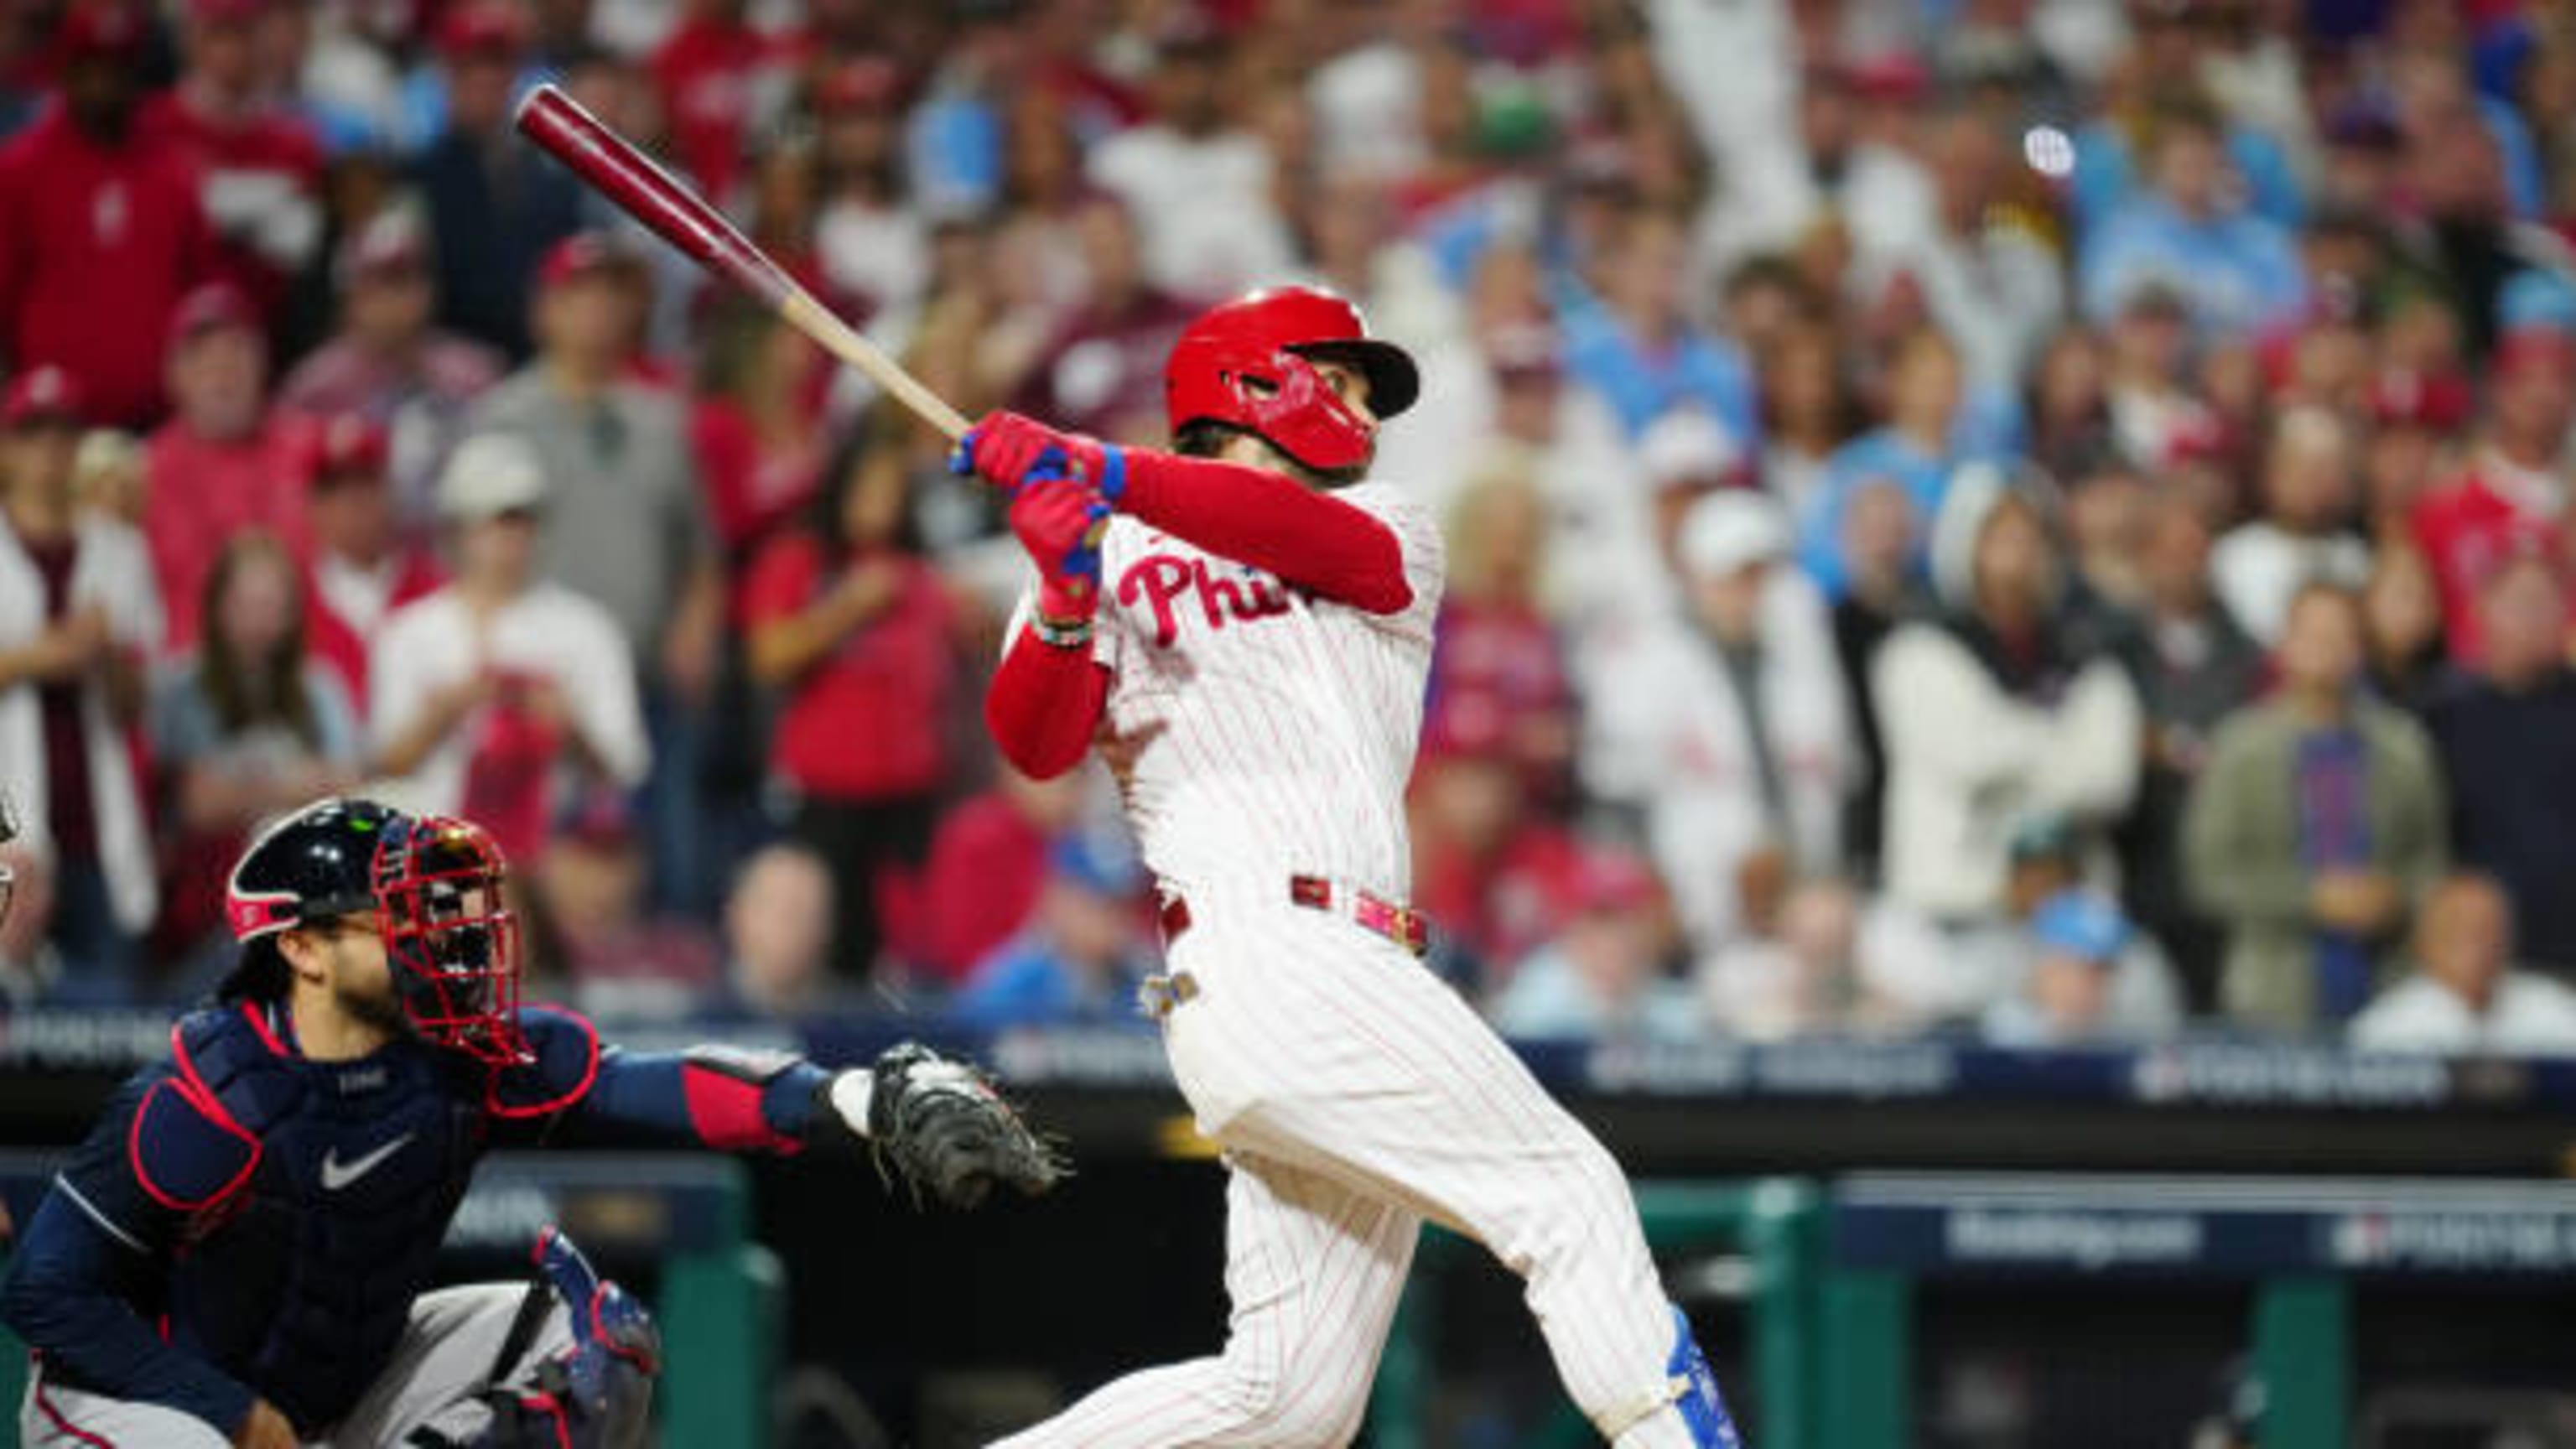 Bryce Harper once again shows he's a Prime-time player 